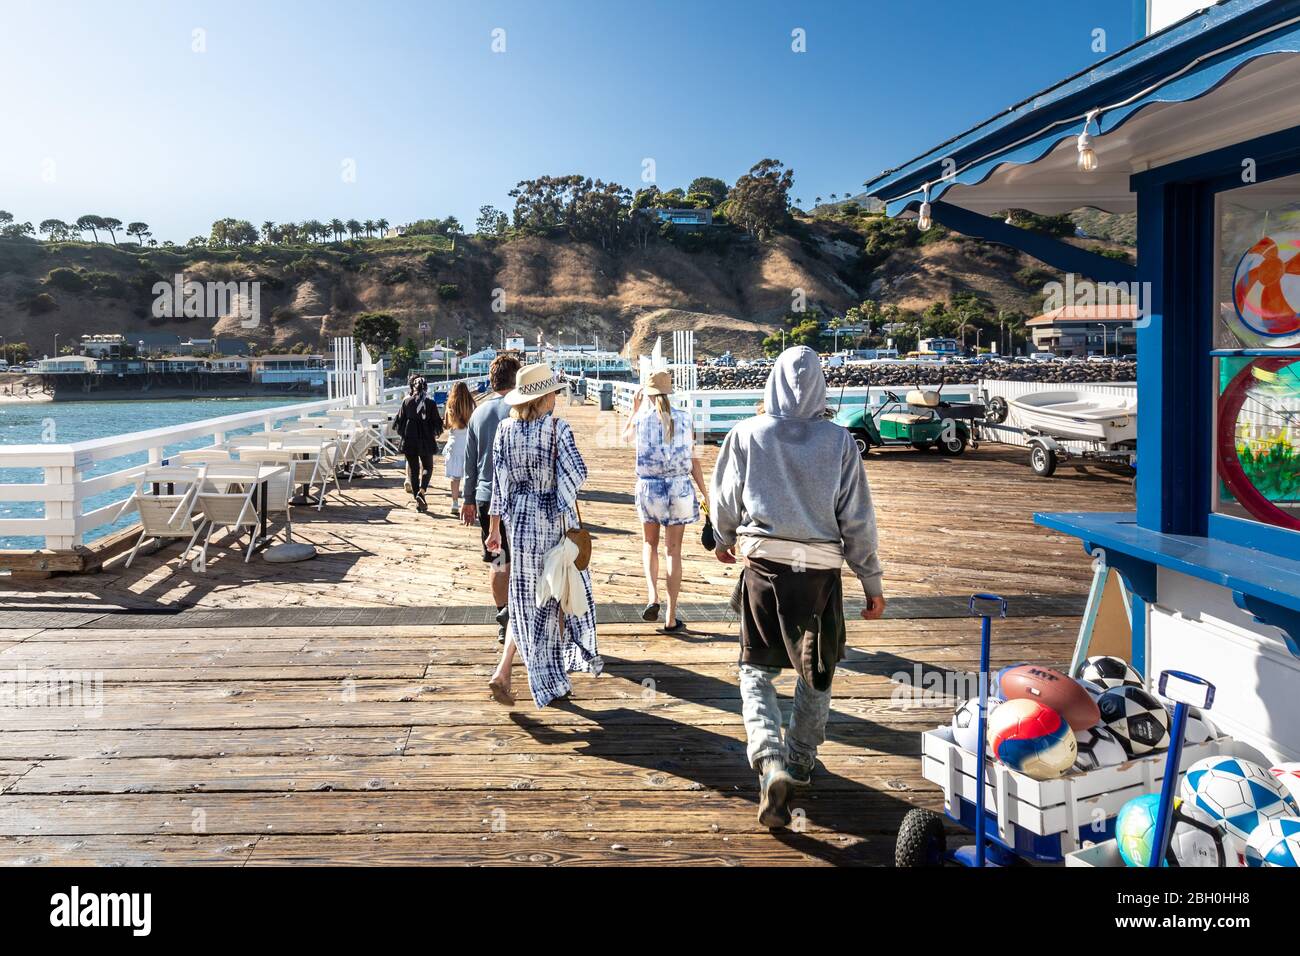 Iconic view of Malibu as seen from the pier, in a sunny summer day, with a group of people walking away in the late afternoon light Stock Photo